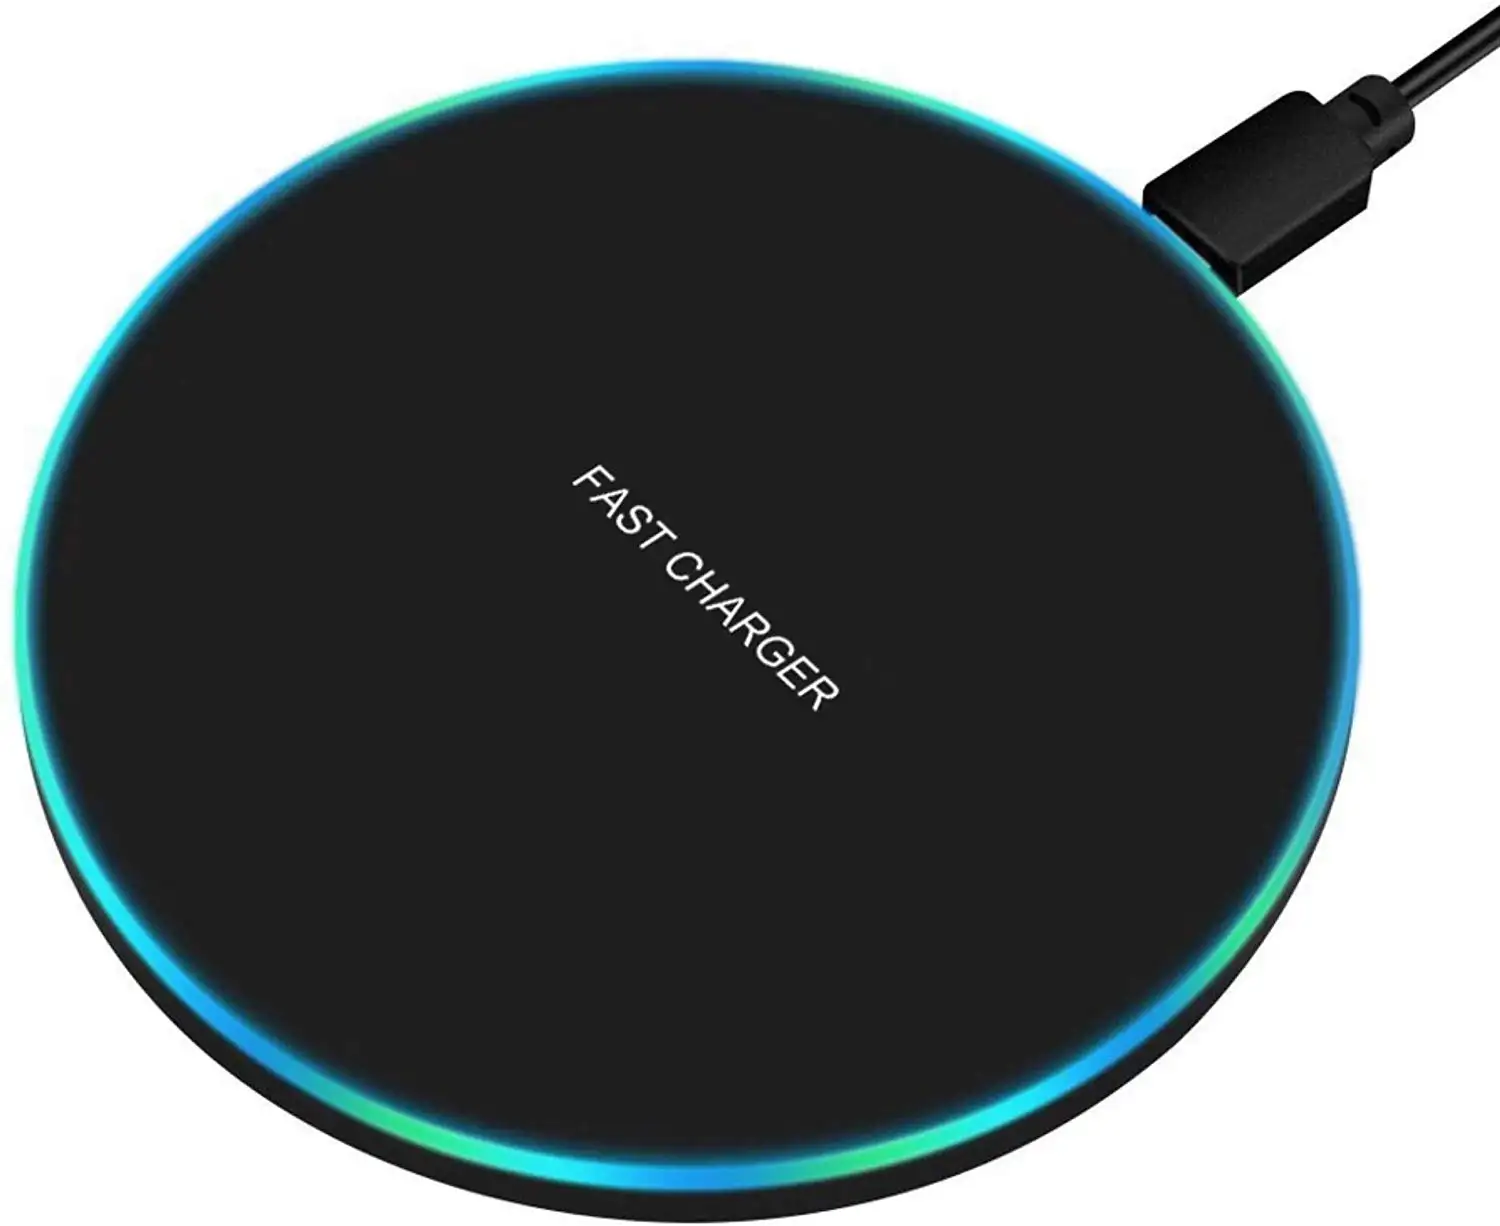 High Quality Universal Super Fast Charging Portable Round 10w Qi Premium Certified Mobile Phone Wireless Charger Pad